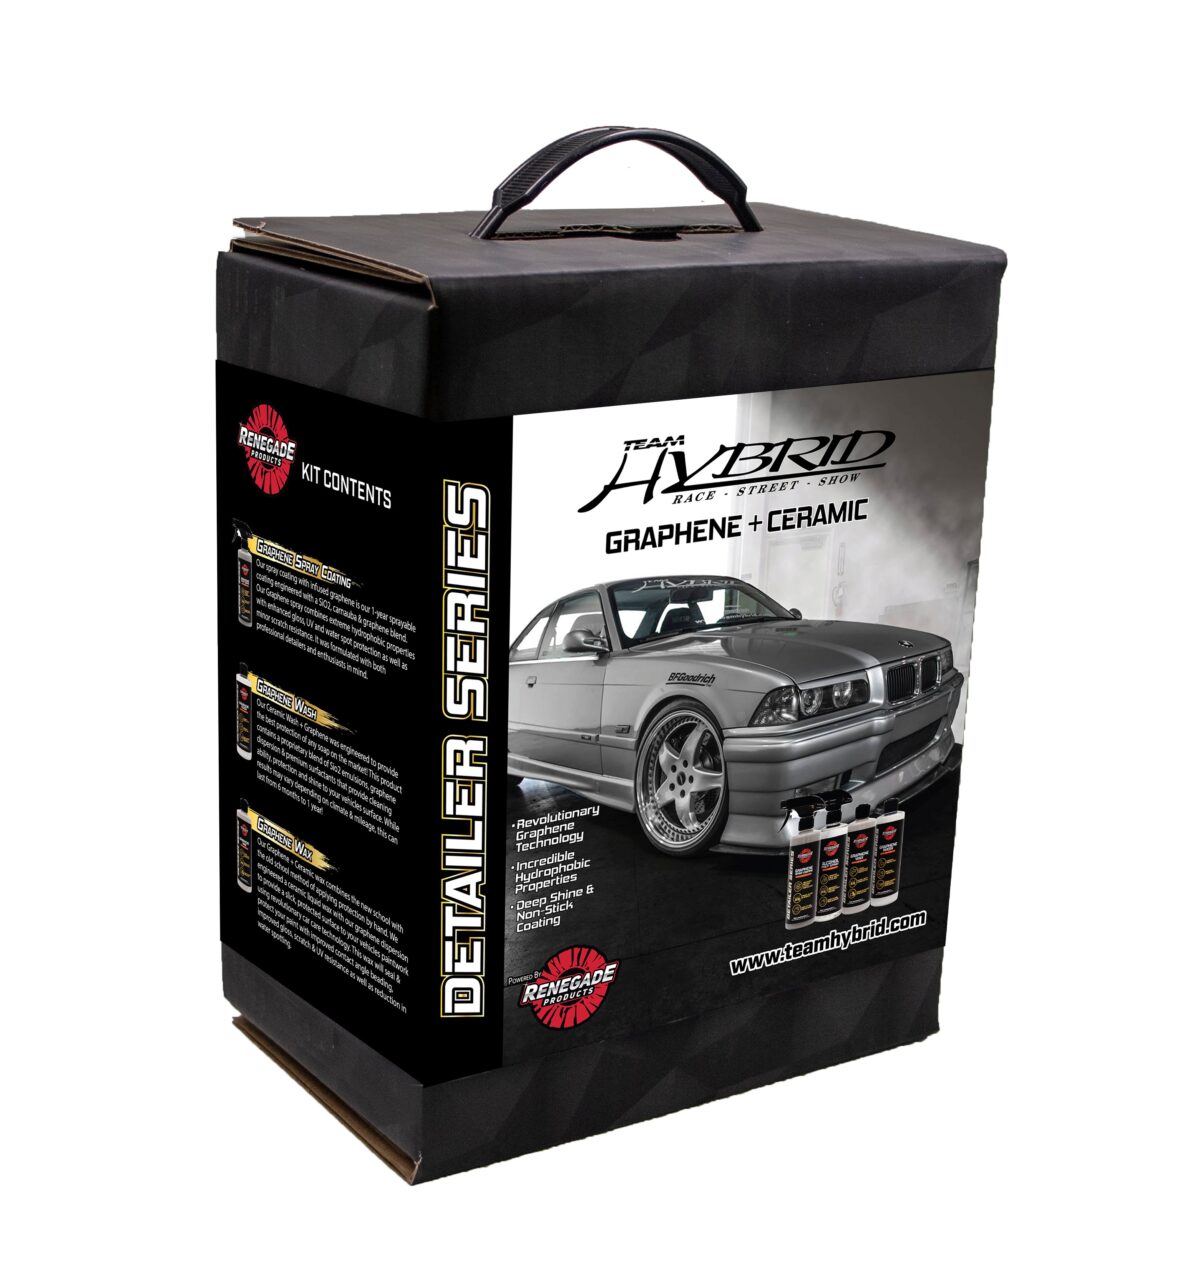 First Ever Release of Team Hybrid x Renegade Car Care Kits